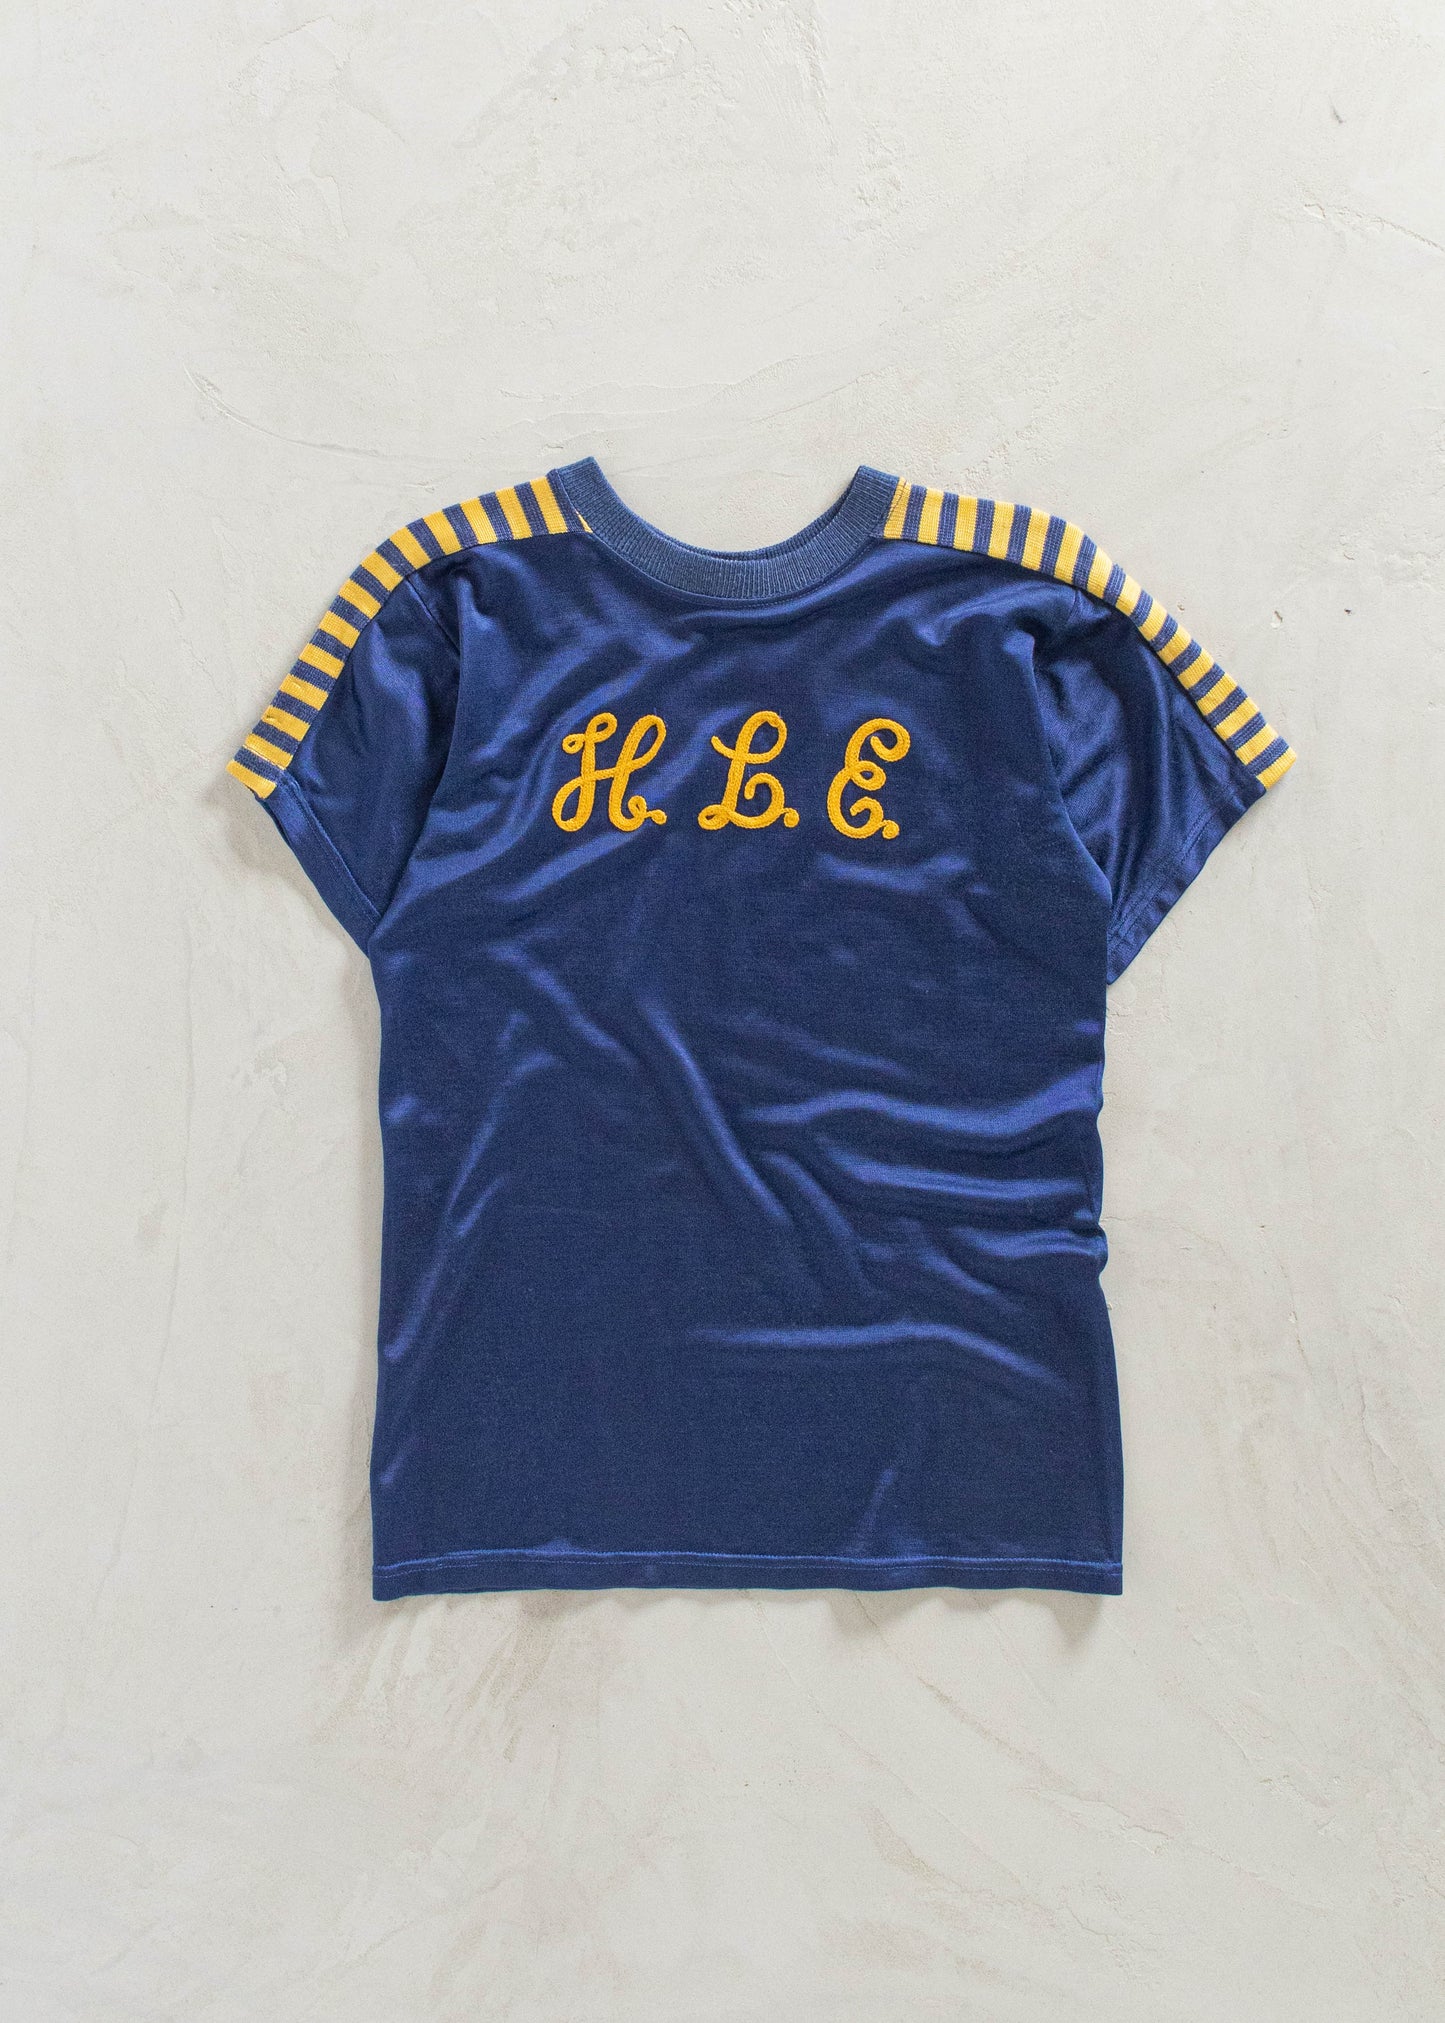 1960s H.E.L Chainstitched Sport Jersey Size XS/S